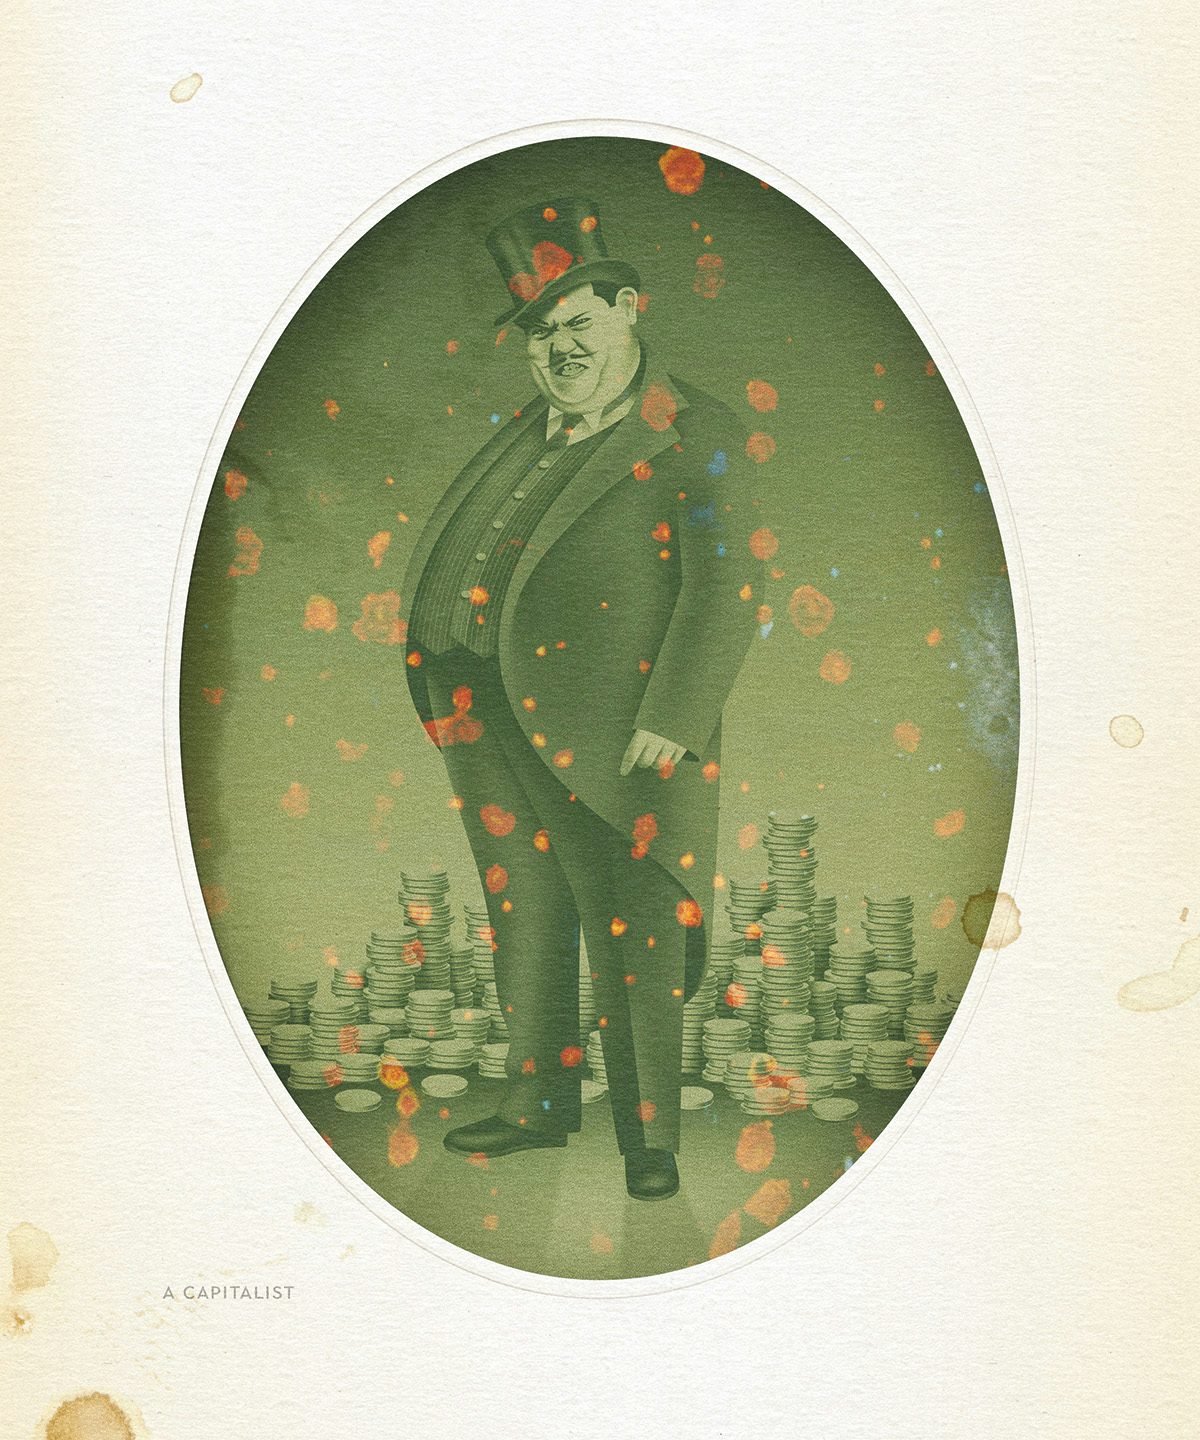 Illustration in the style of an old photo featuring a moustached man wearing a suit and top hat